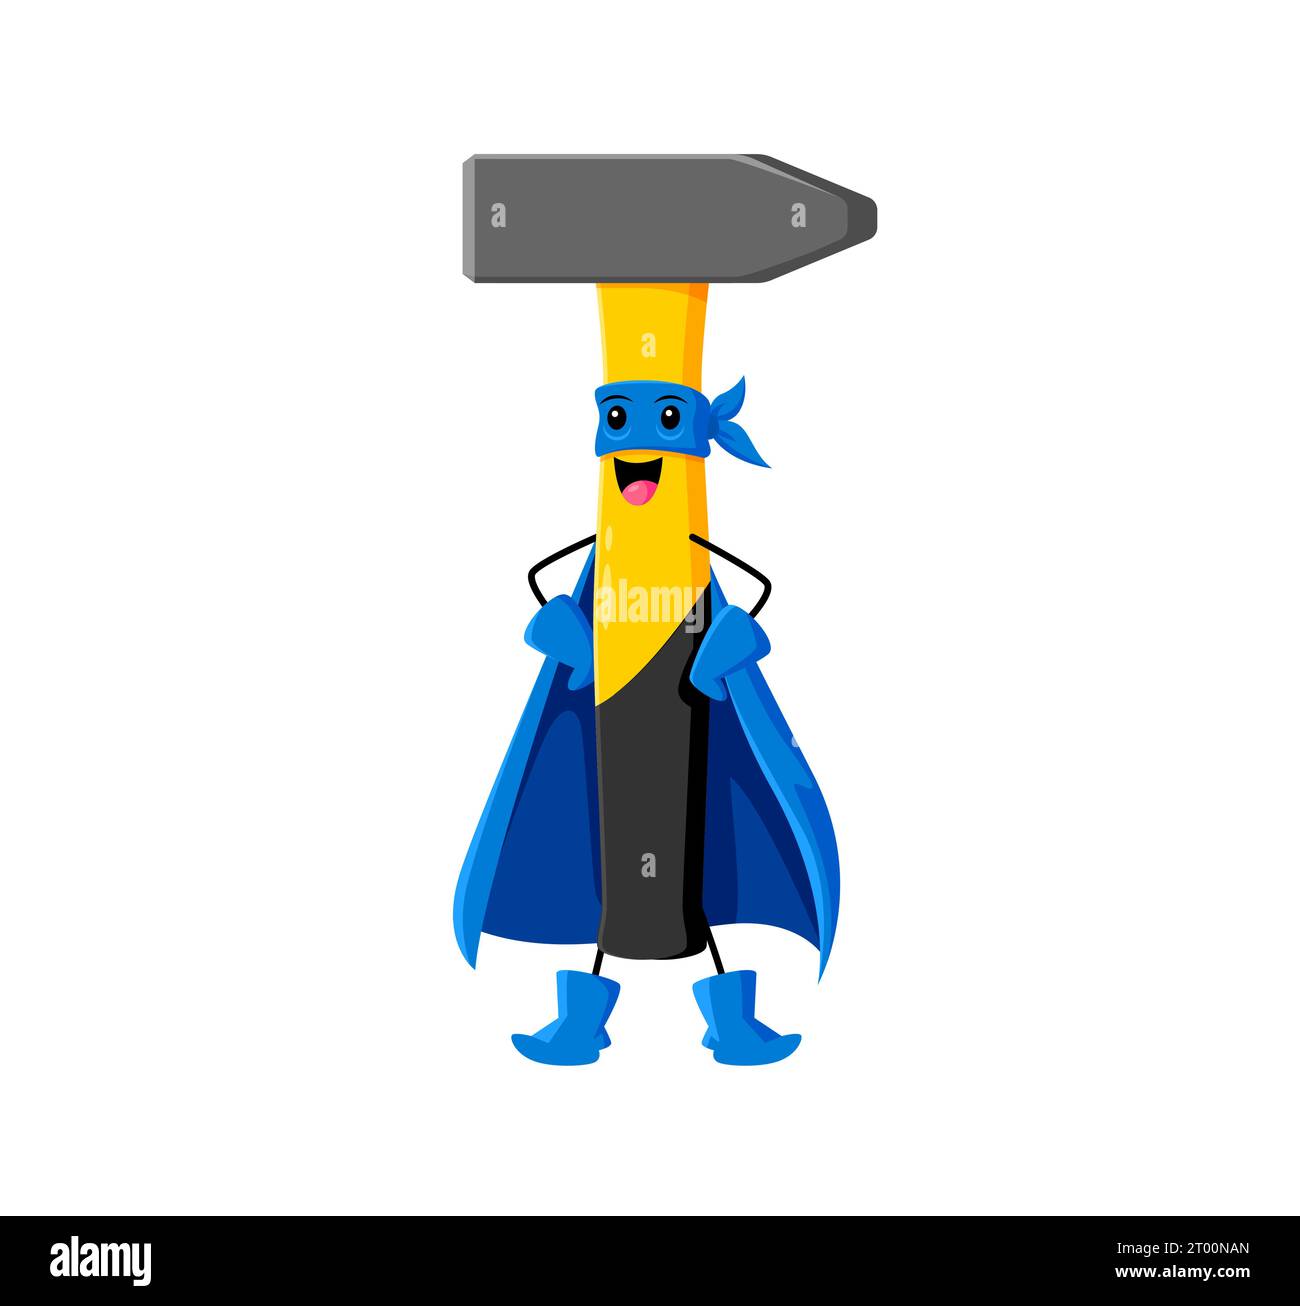 Cartoon hammer superhero character. Isolated vector construction tool wear blue cloak and mask stand with arms akimbo with mischievous grin on face. Whimsical instrument ready for fixing and repair Stock Vector